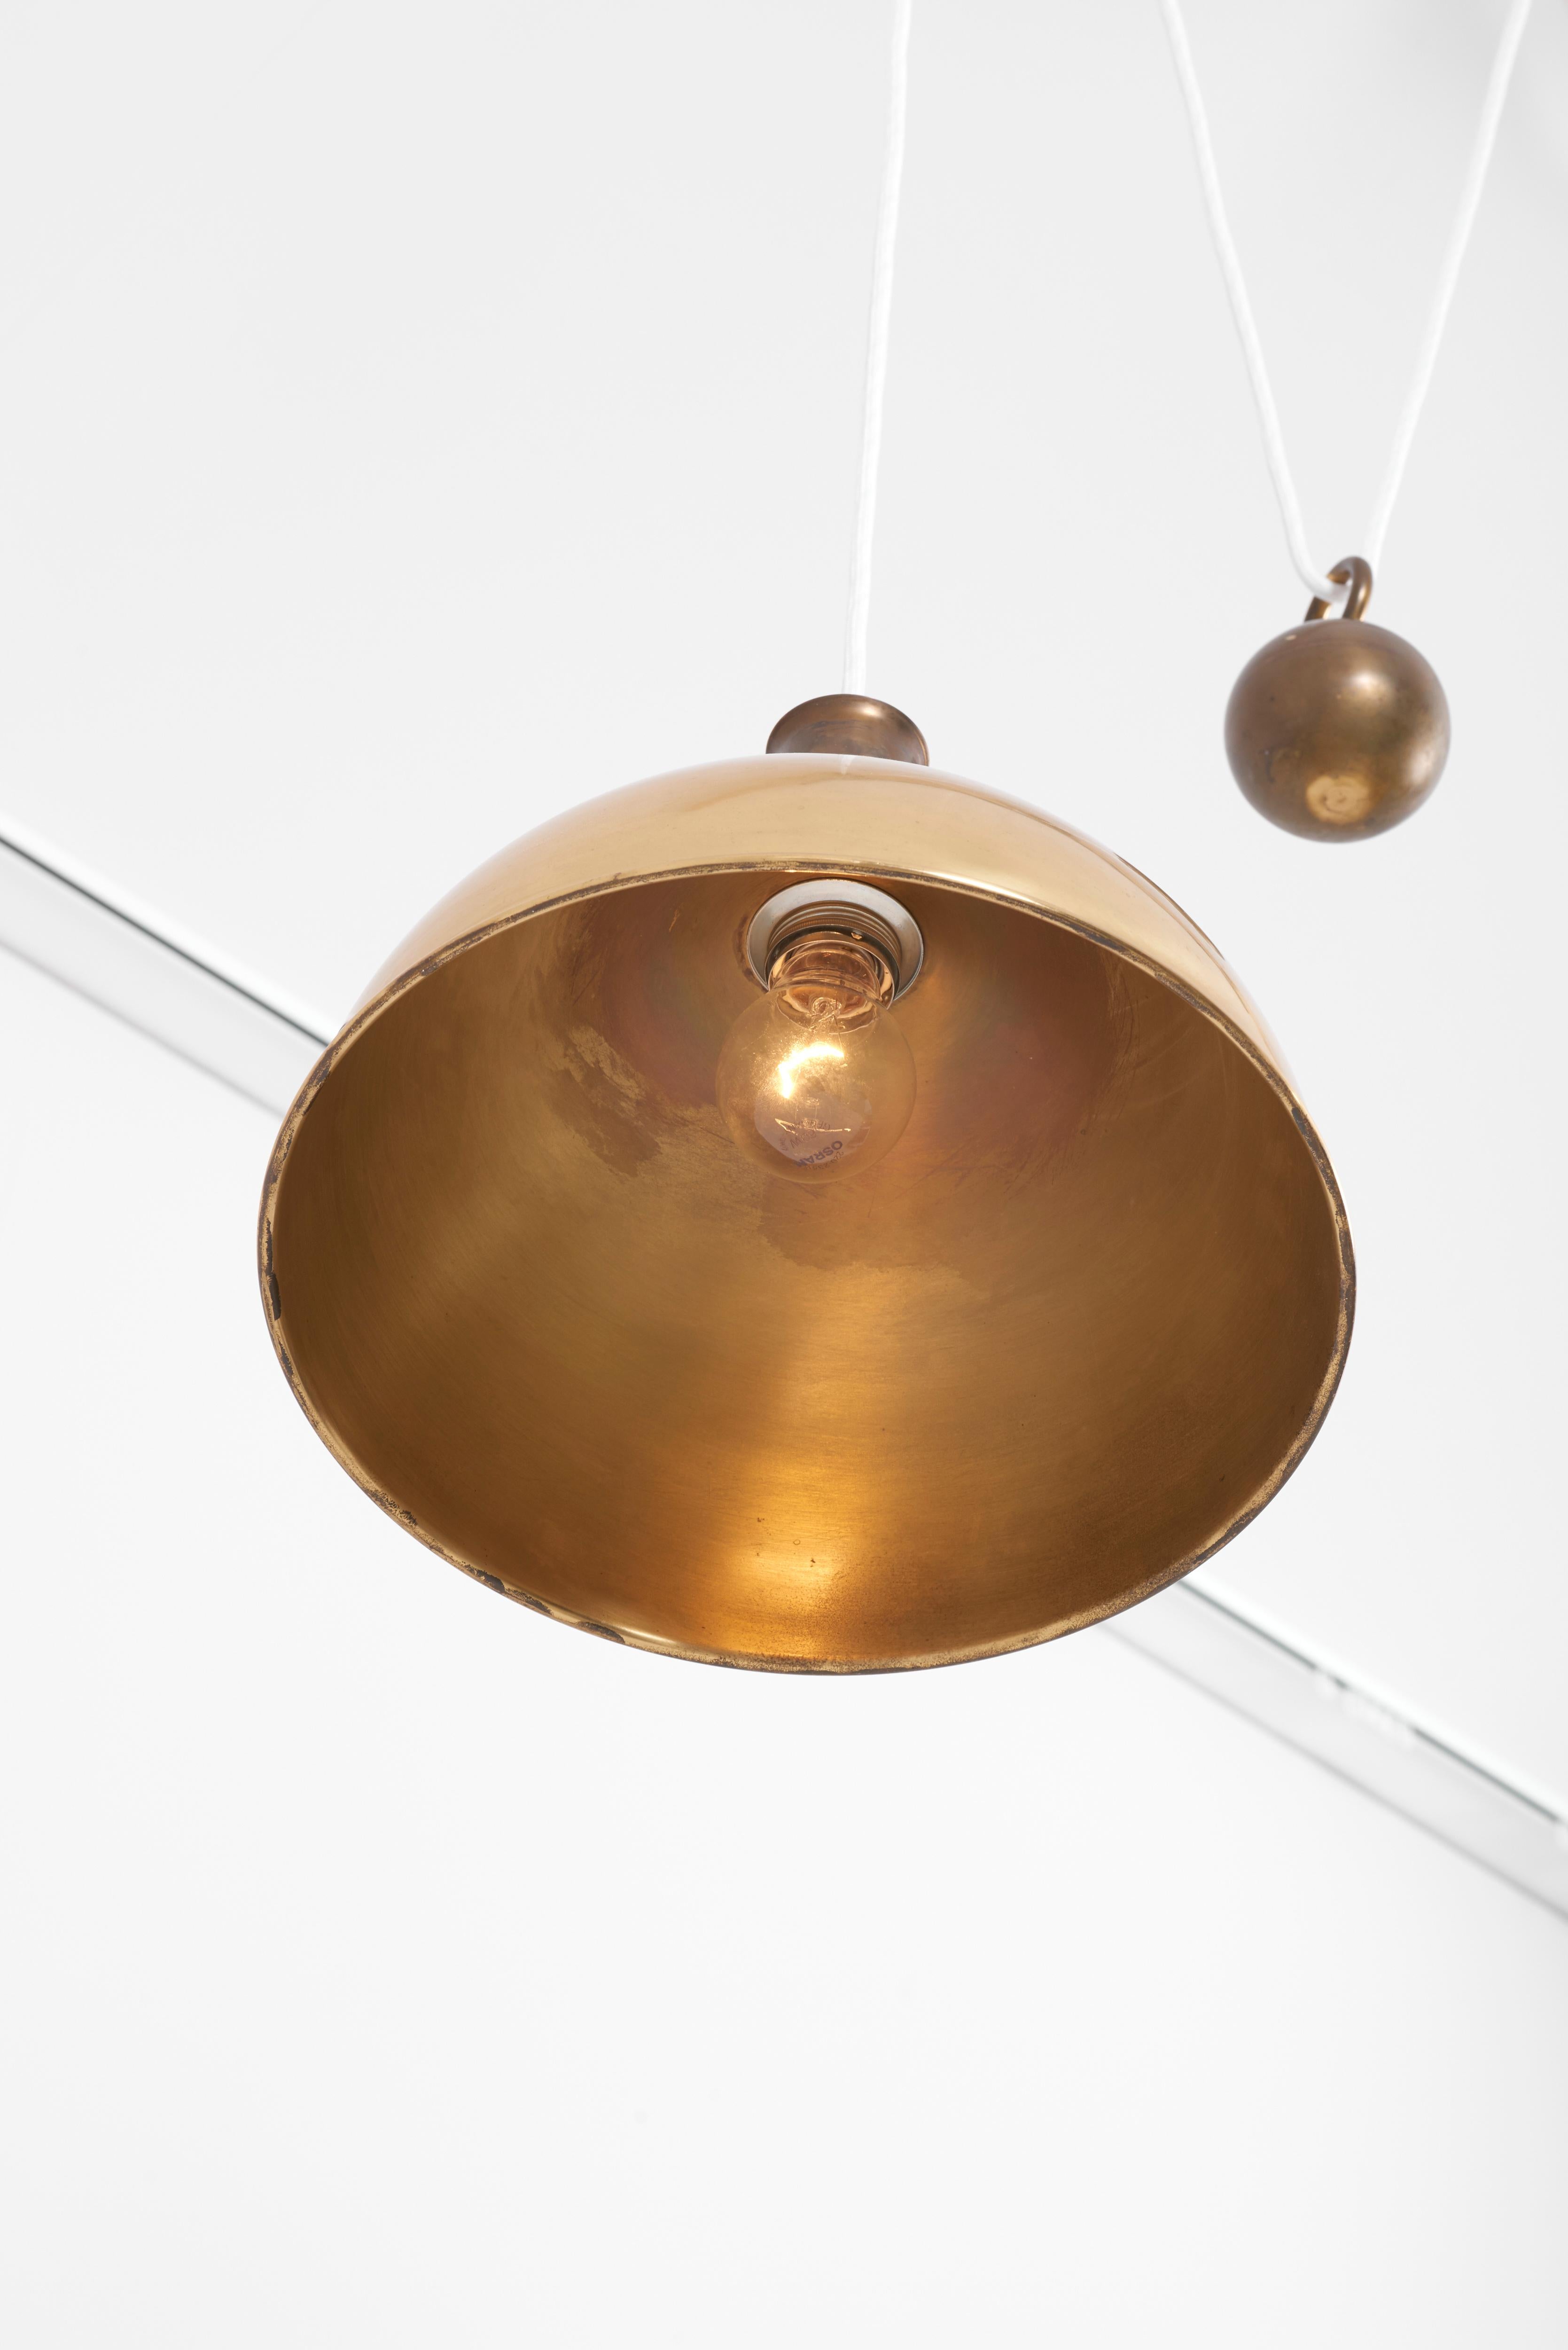 Mid-20th Century Rare Early Florian Schulz Double Duos Counterweight Pendant Lamp in Solid Brass